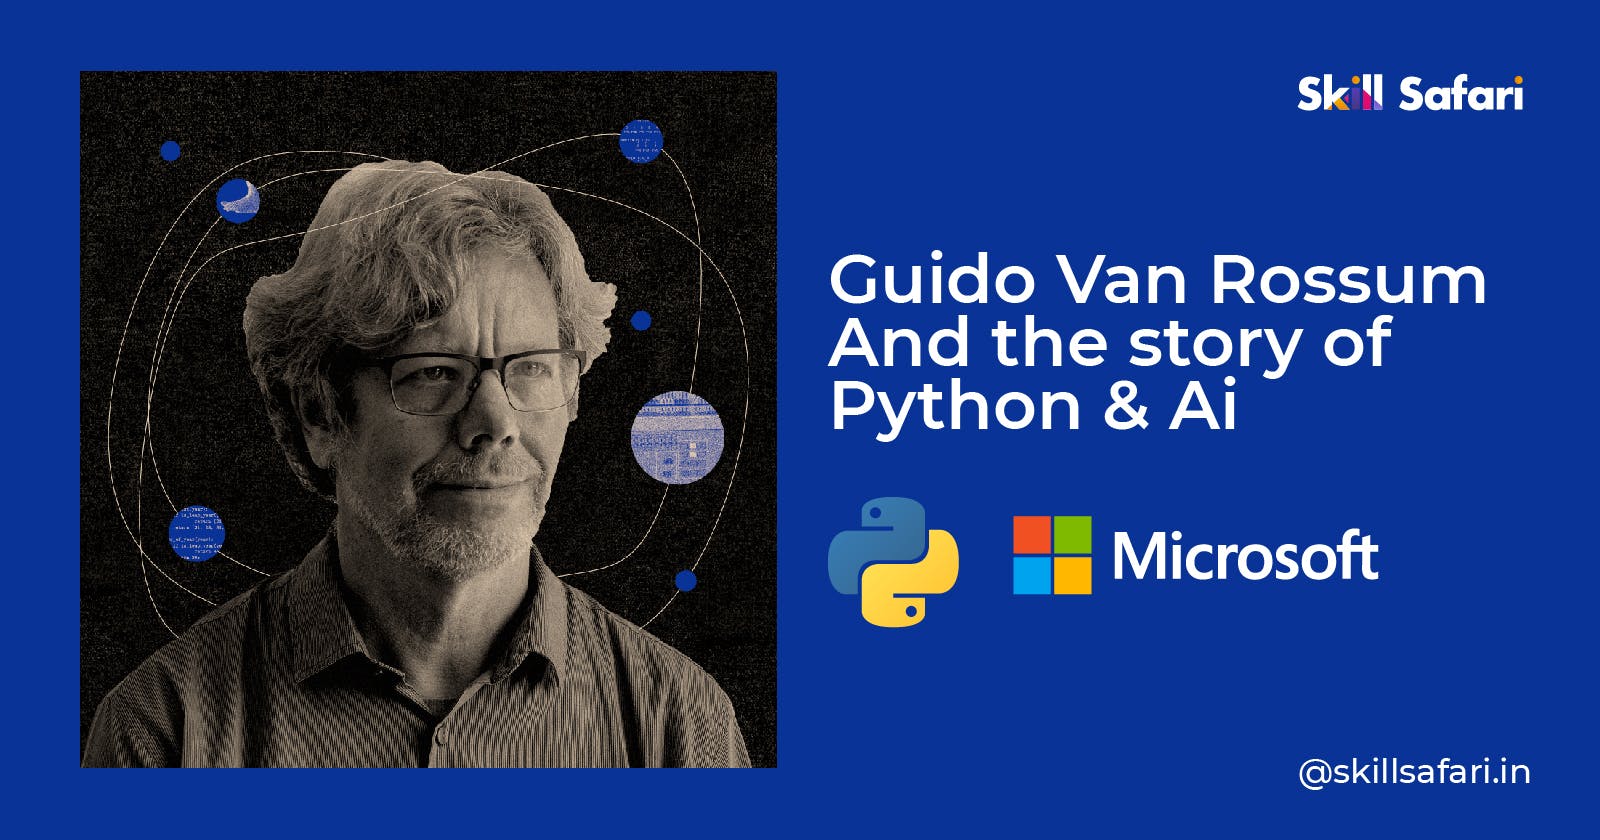 Guido Van Rossum  And the story of Python & Ai